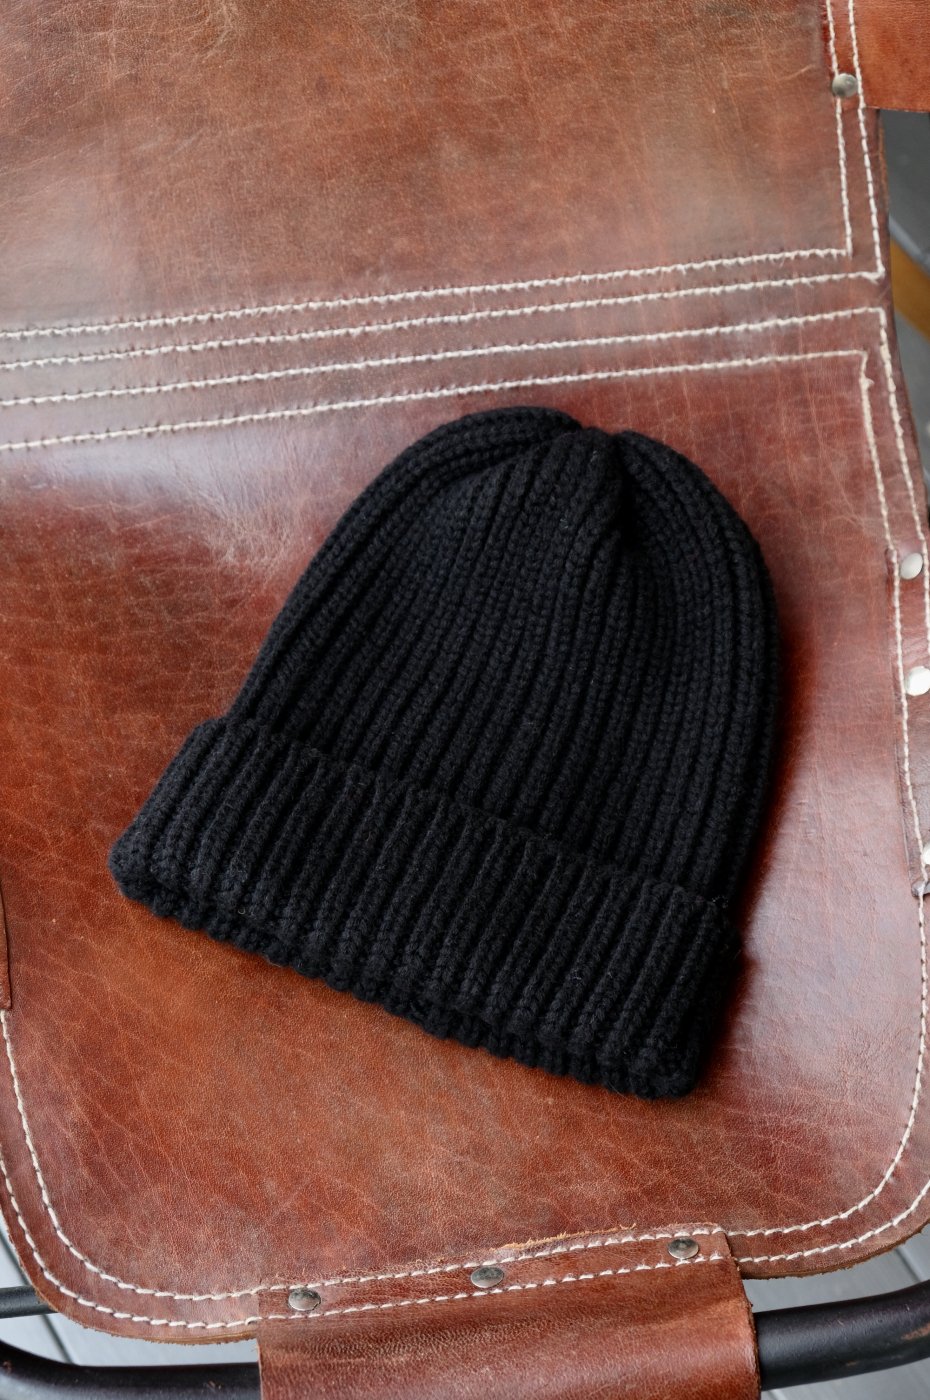 <img class='new_mark_img1' src='https://img.shop-pro.jp/img/new/icons8.gif' style='border:none;display:inline;margin:0px;padding:0px;width:auto;' />Corgi コーギー-CASHMERE KNIT HAT for LOCALERS-BLACK